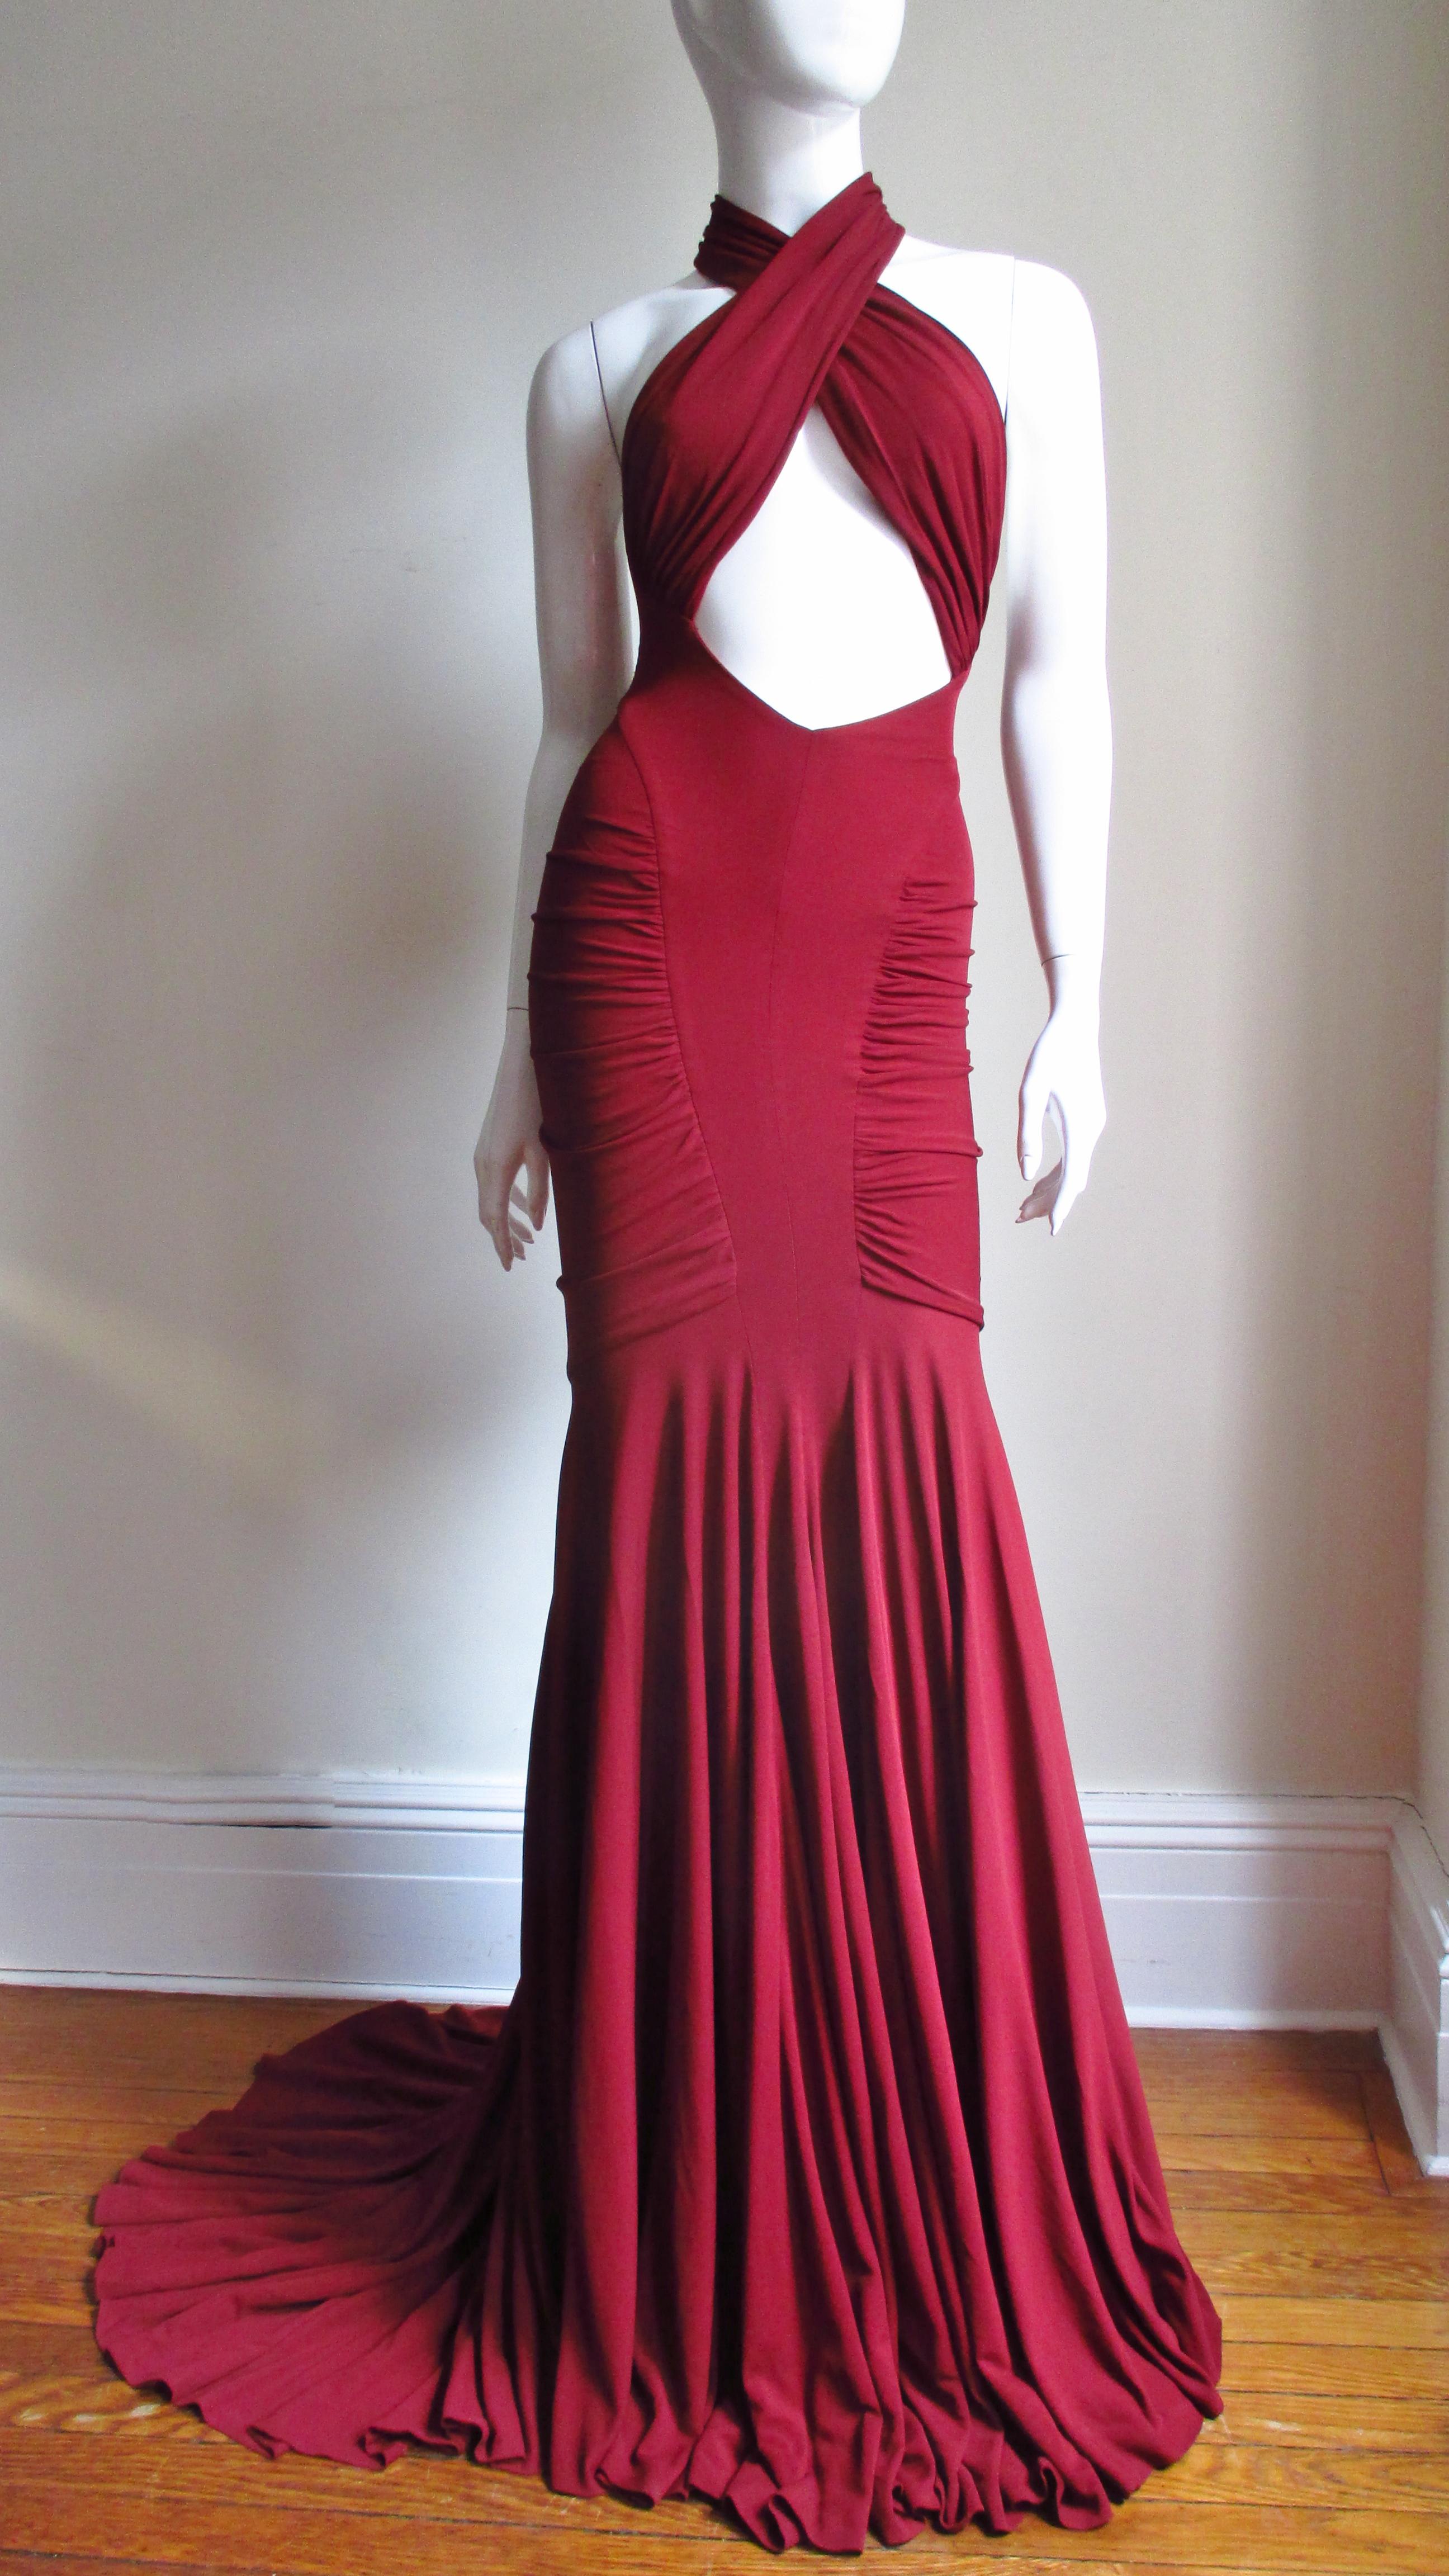 A stunning burgundy fine silk jersey gown by Guy Laroche. It has panels from the side waist crossing the bust, wrapping around the neck leaving a cut out midriff and cut in shoulders in the back.  The skirt has center front and back knee length